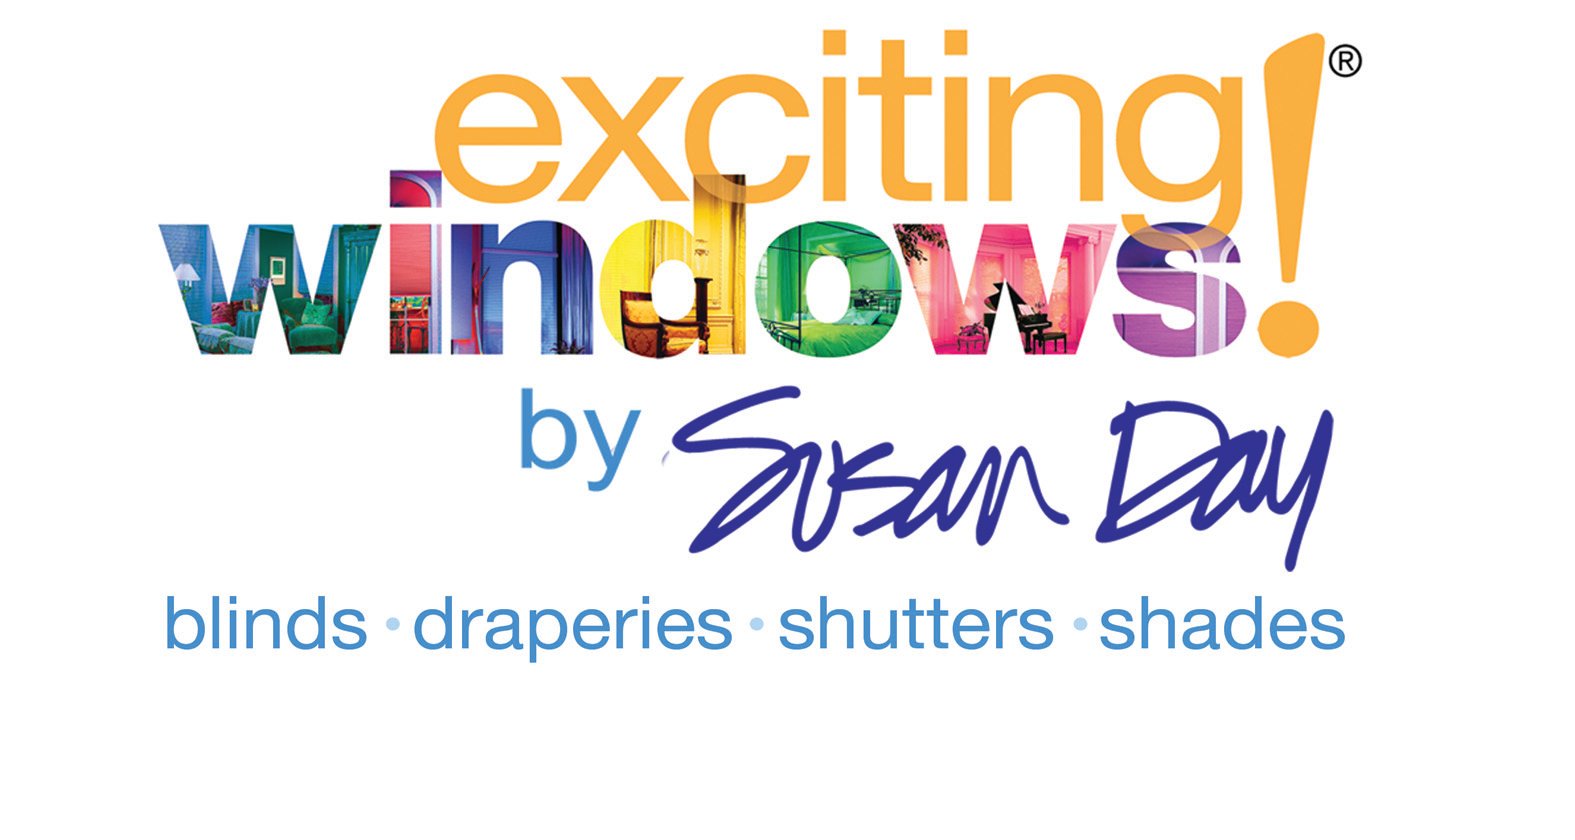 Exciting Windows! by Susan Day Logo